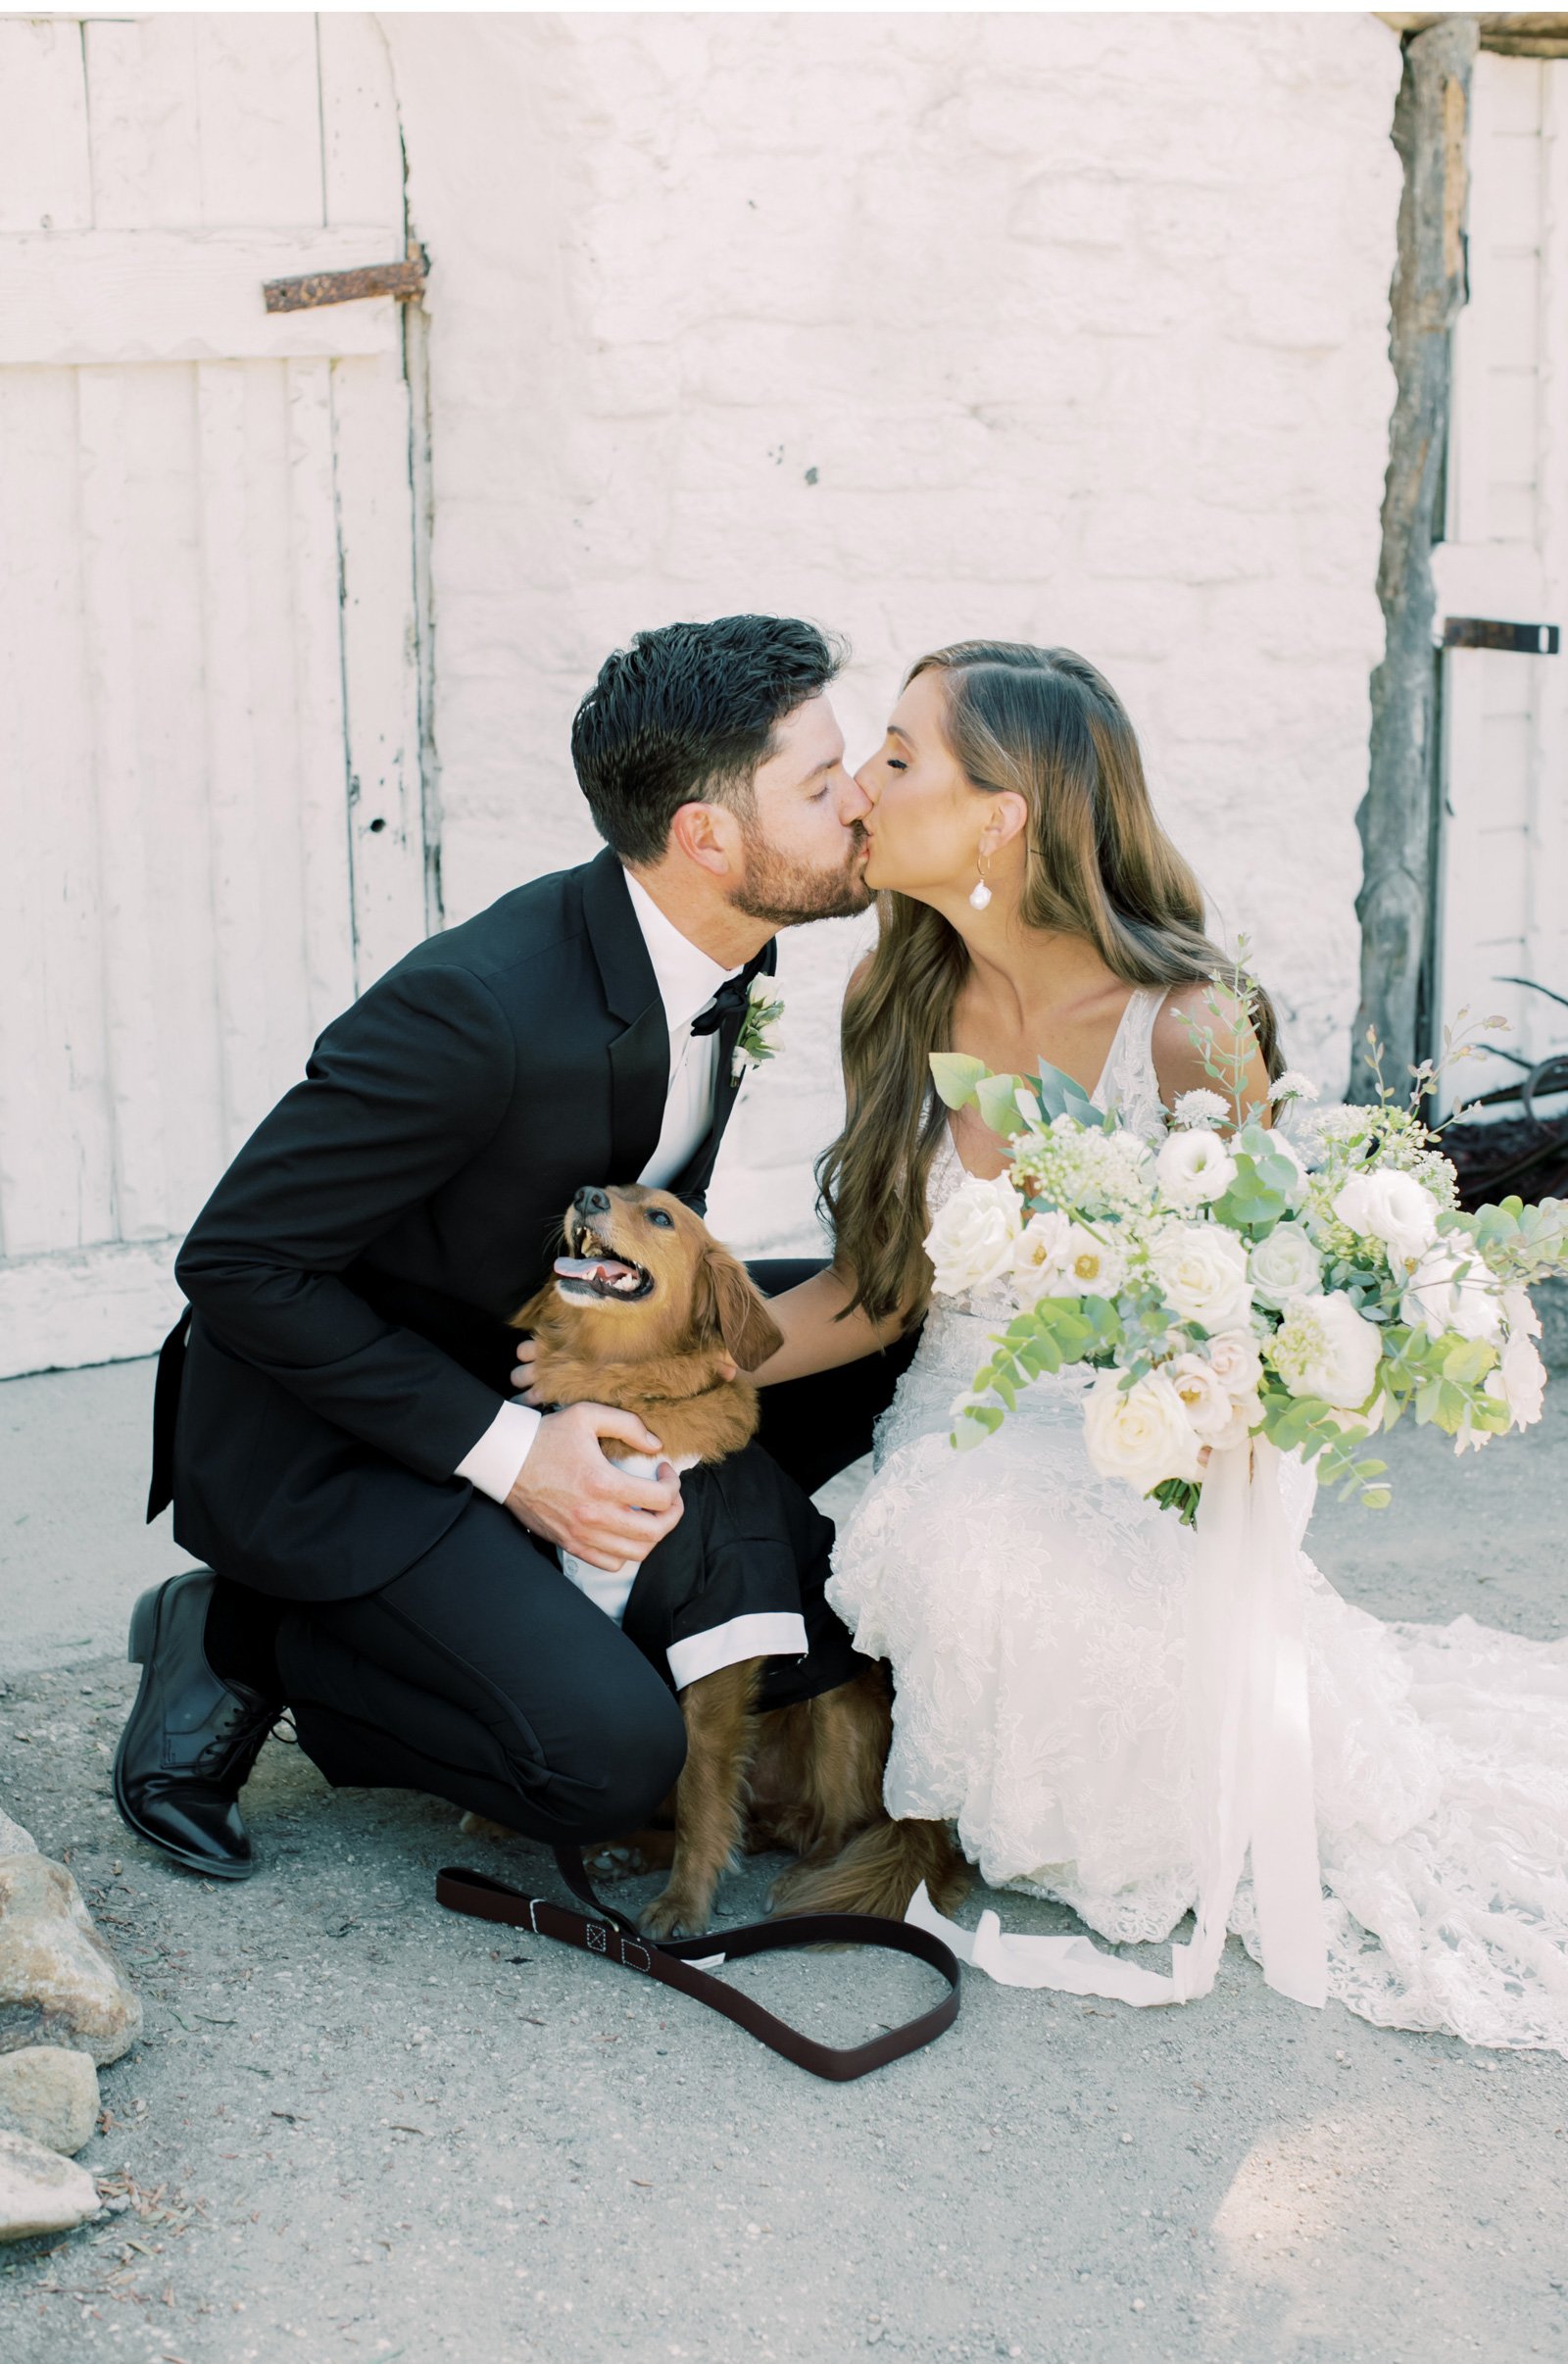 Dog-Wedding-Photo-Clean-and-Modern-Wedding-Photography-High-End-Wedding-Photographers-Bright-and-Airy-Photography-Southern-California-Events-Bride-and-Groom-Photo_02.jpg